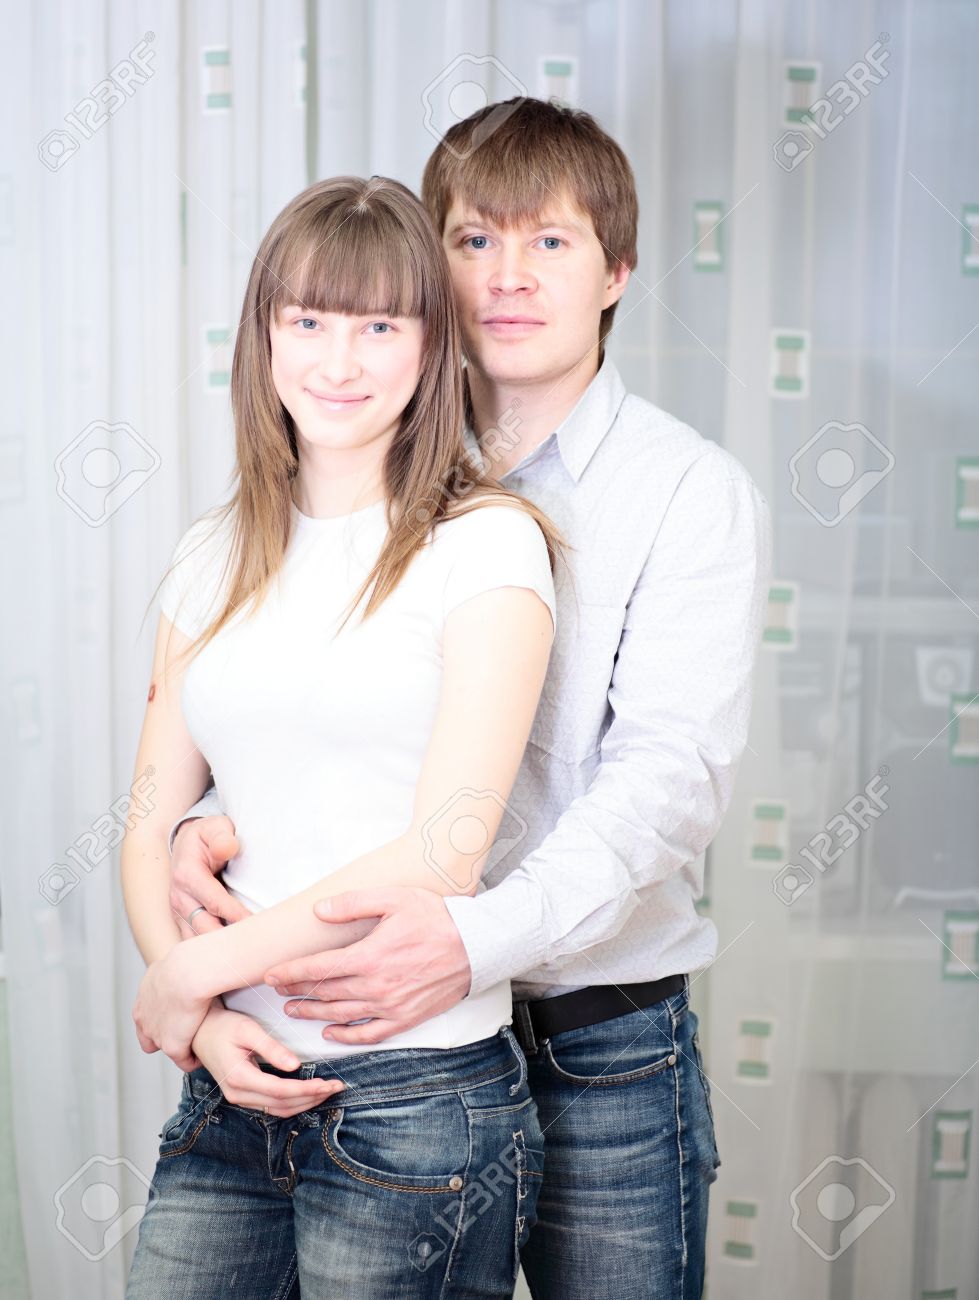 8092736-young-happy-white-couple-in-jeans-embracing.jpg